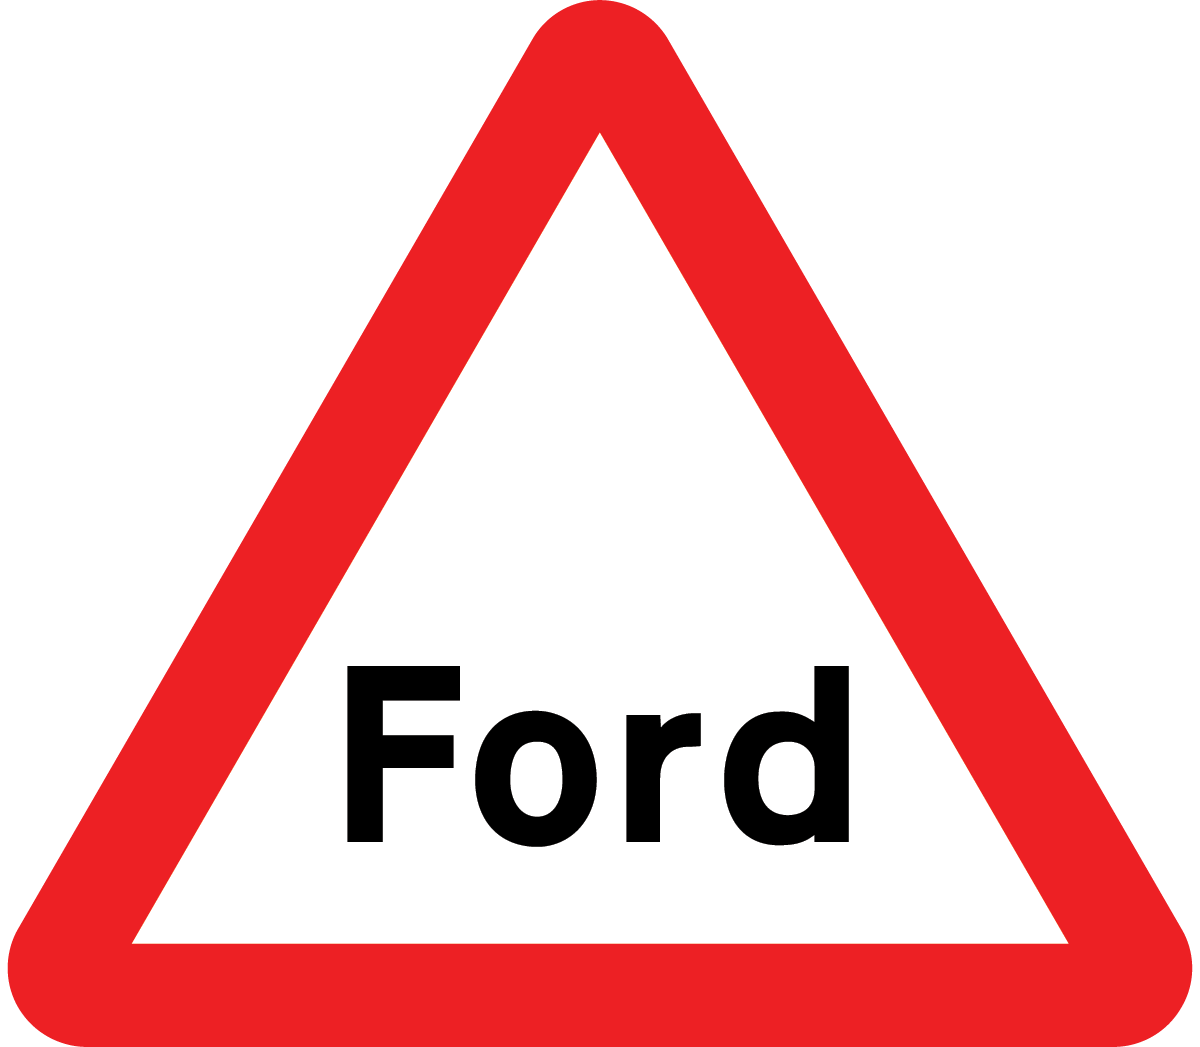 red signs